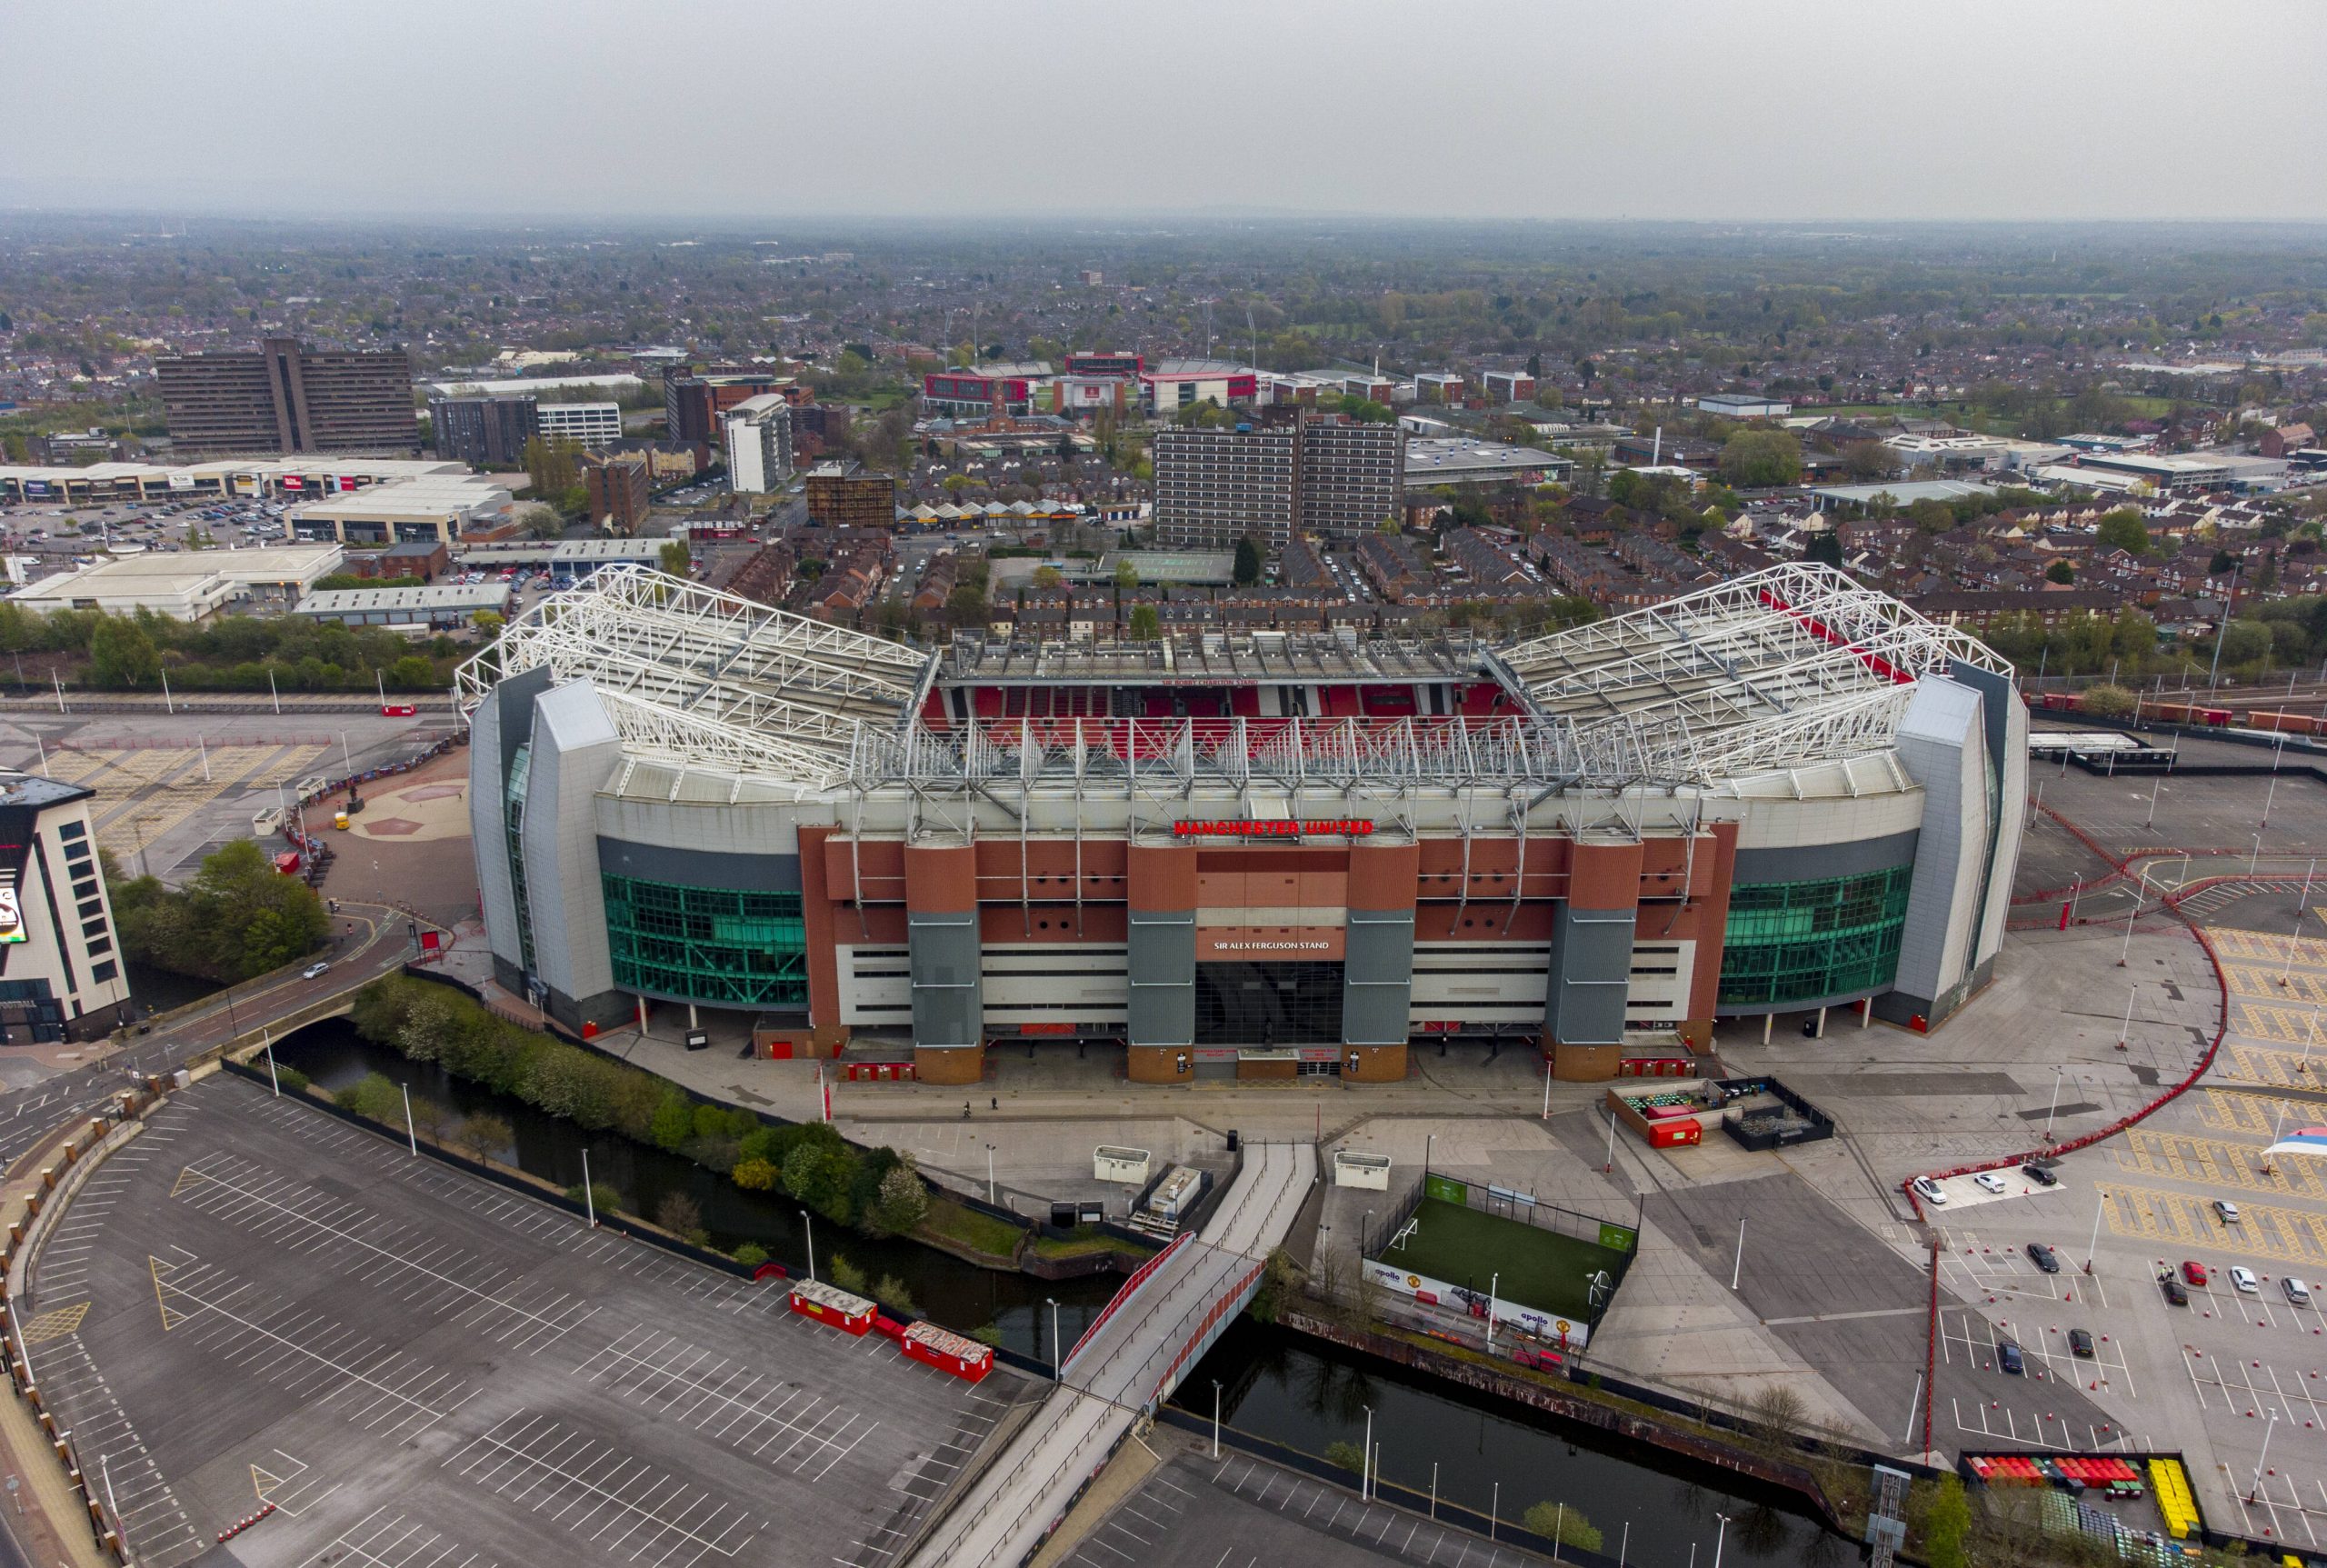 Old Trafford Stadium in its full glory. Copyright: Peter Byrne 59302712